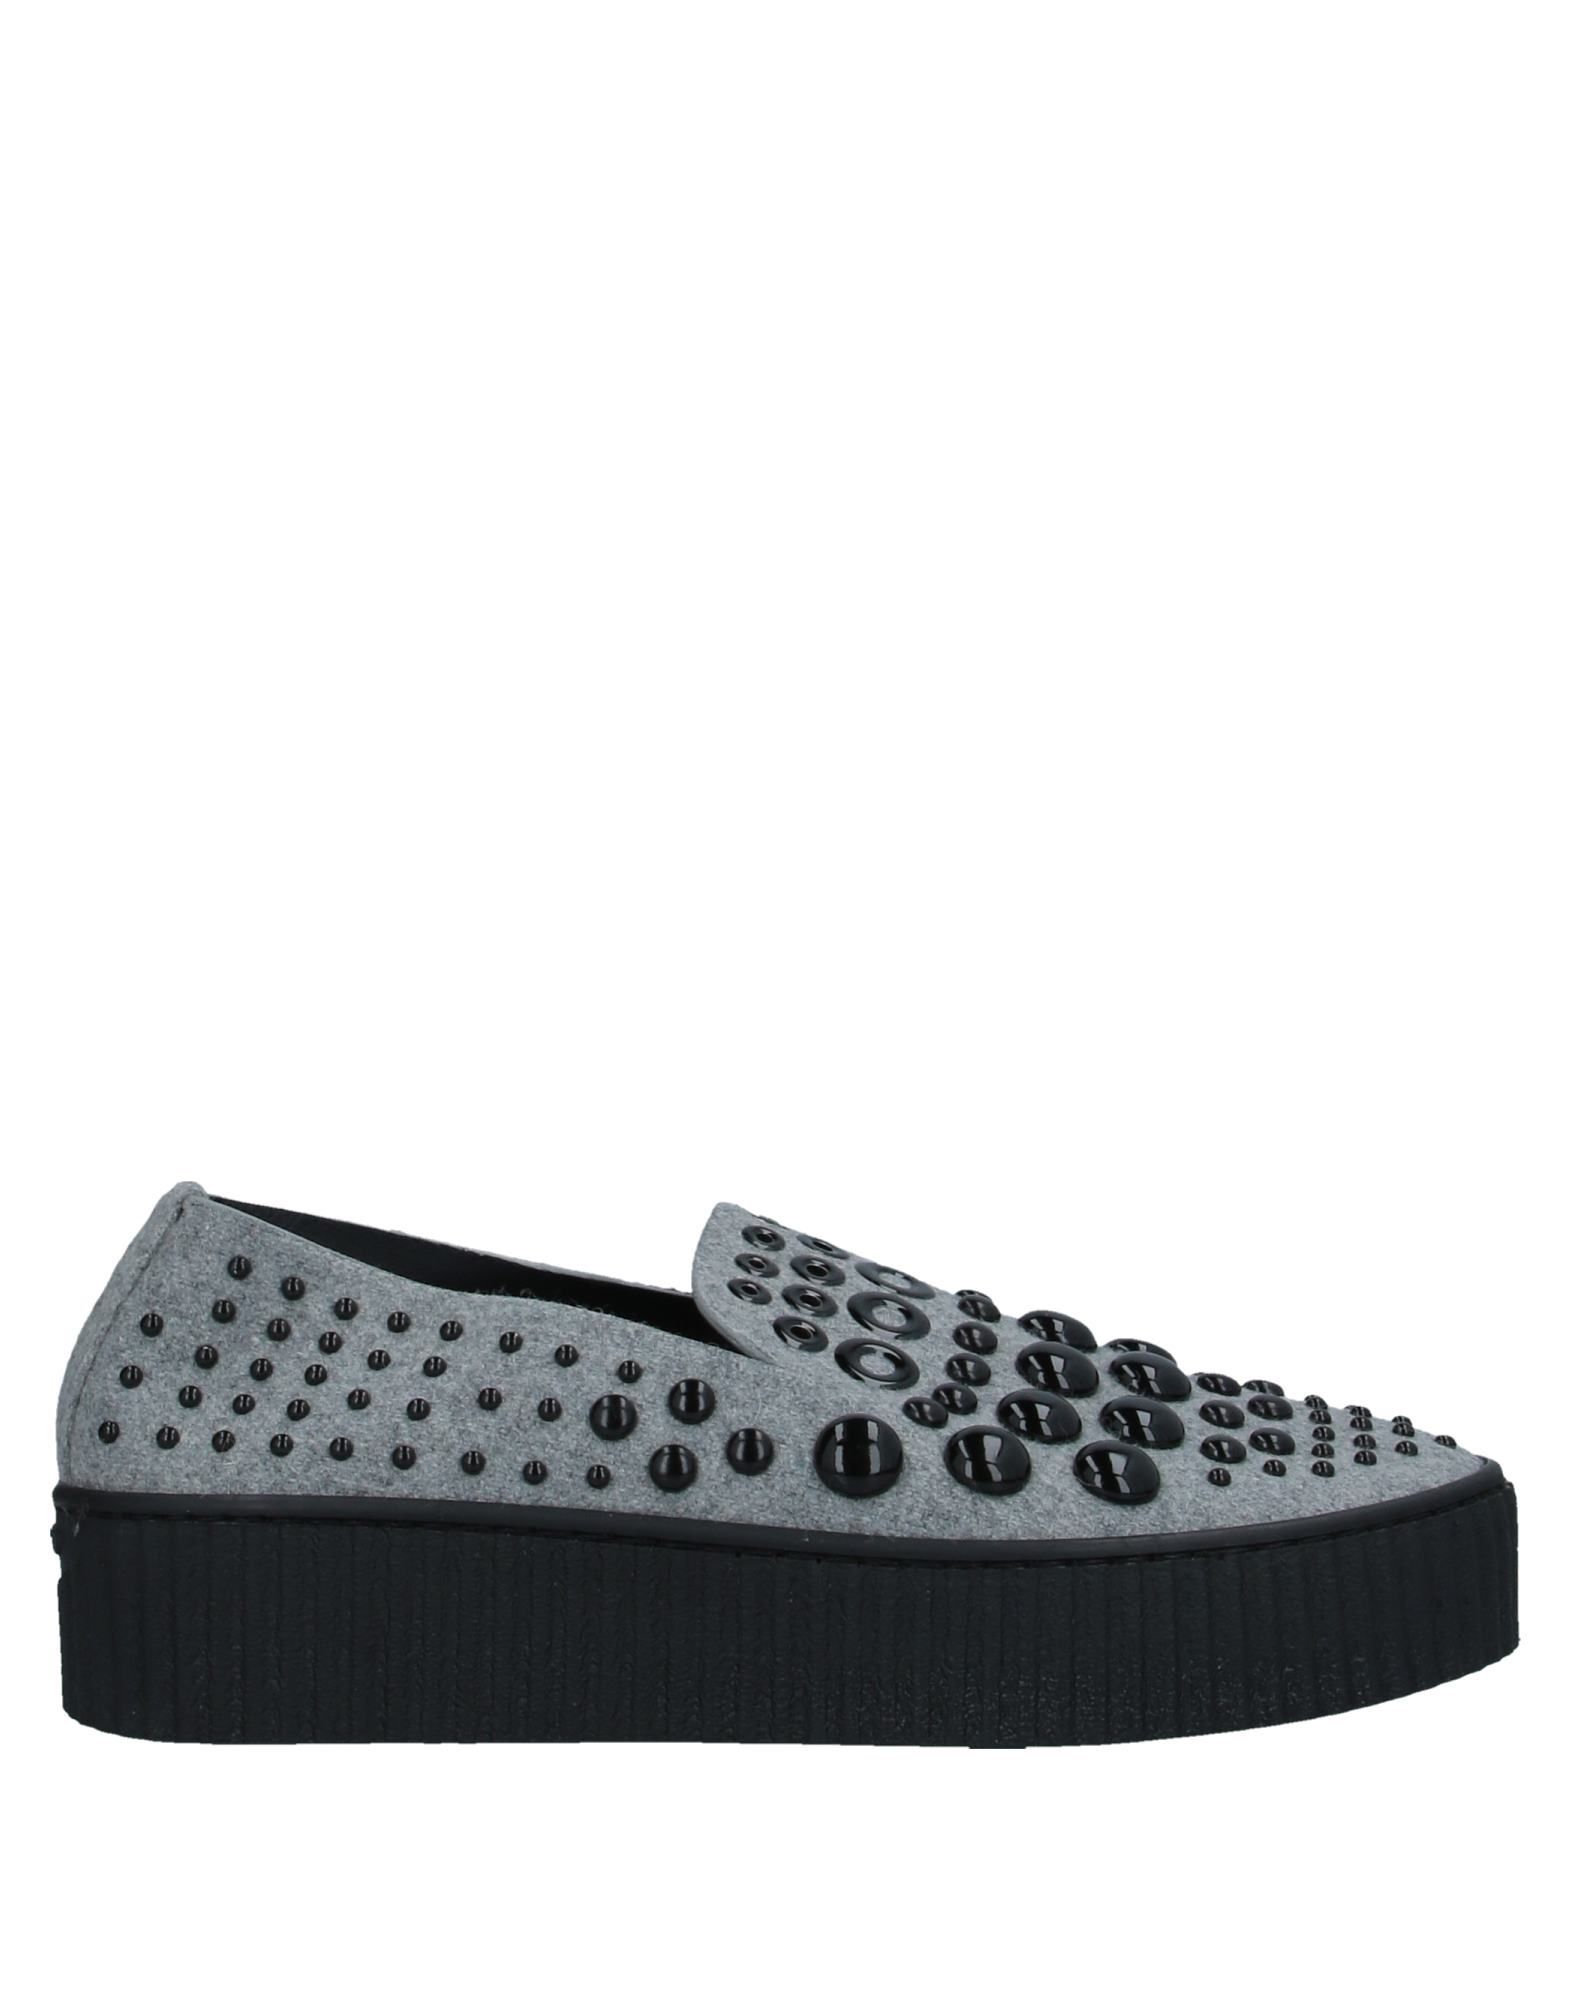 flannel, studs, solid colour, round toeline, wedge heel, leather lining, rubber cleated sole, contains non-textile parts of animal origin, creepers